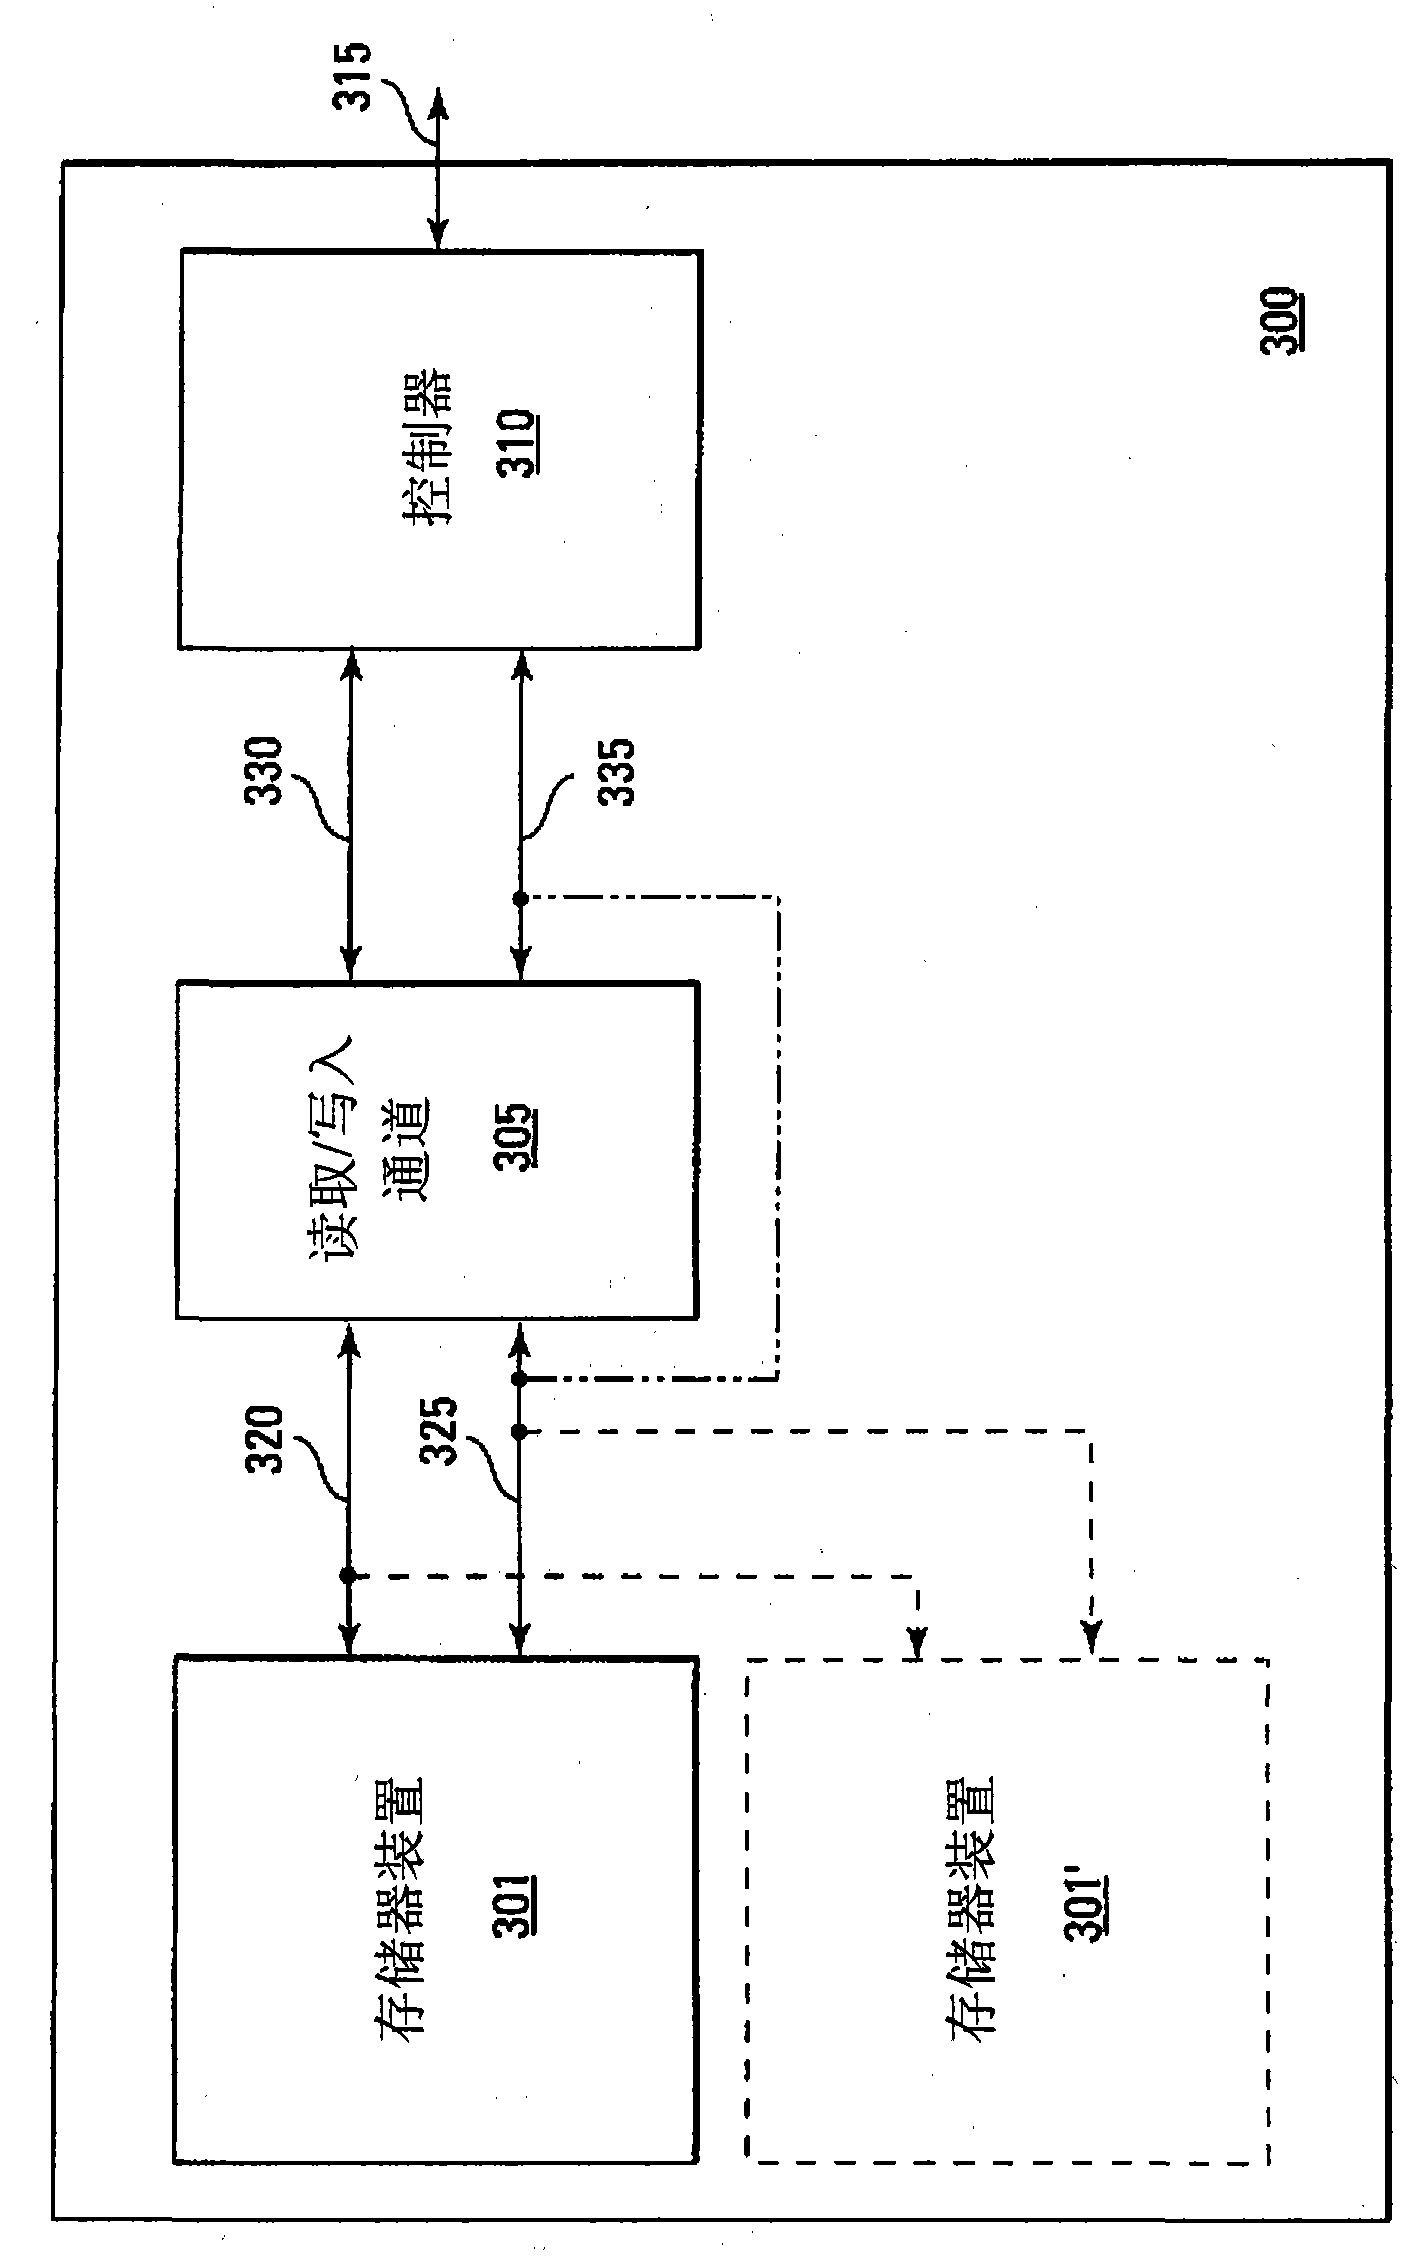 Memory controller self-calibration for removing systemic influence